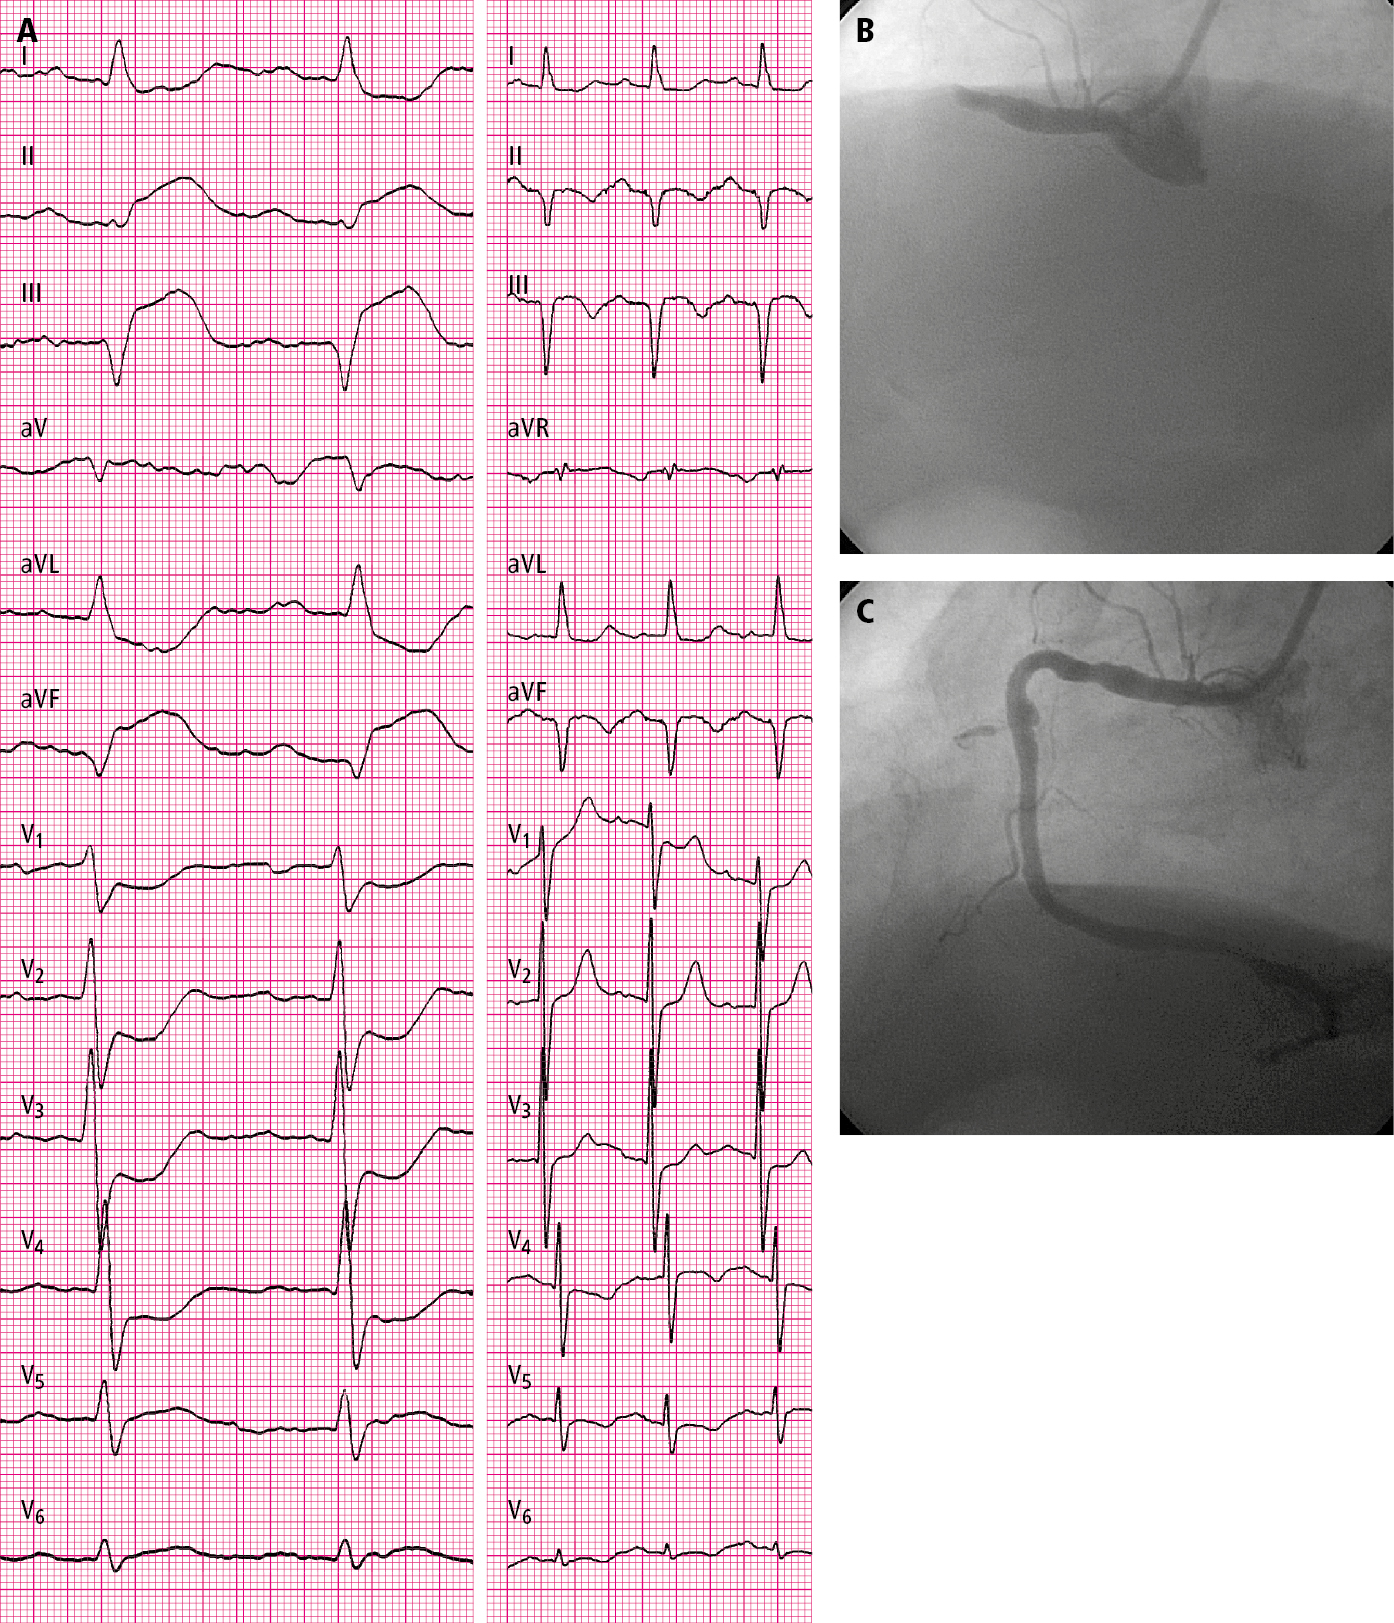 Figure 031_7447.  A 76-year-old patient hospitalized in the second hour of pain:   A  , electrocardiography (ECG) on admission (paper speed, 50 mm/s);   B  , coronary angiography: total occlusion of the right coronary artery before percutaneous coronary intervention (PCI);   C  , post-PCI coronary angiography: right coronary artery (TIMI grade 3 flow). 